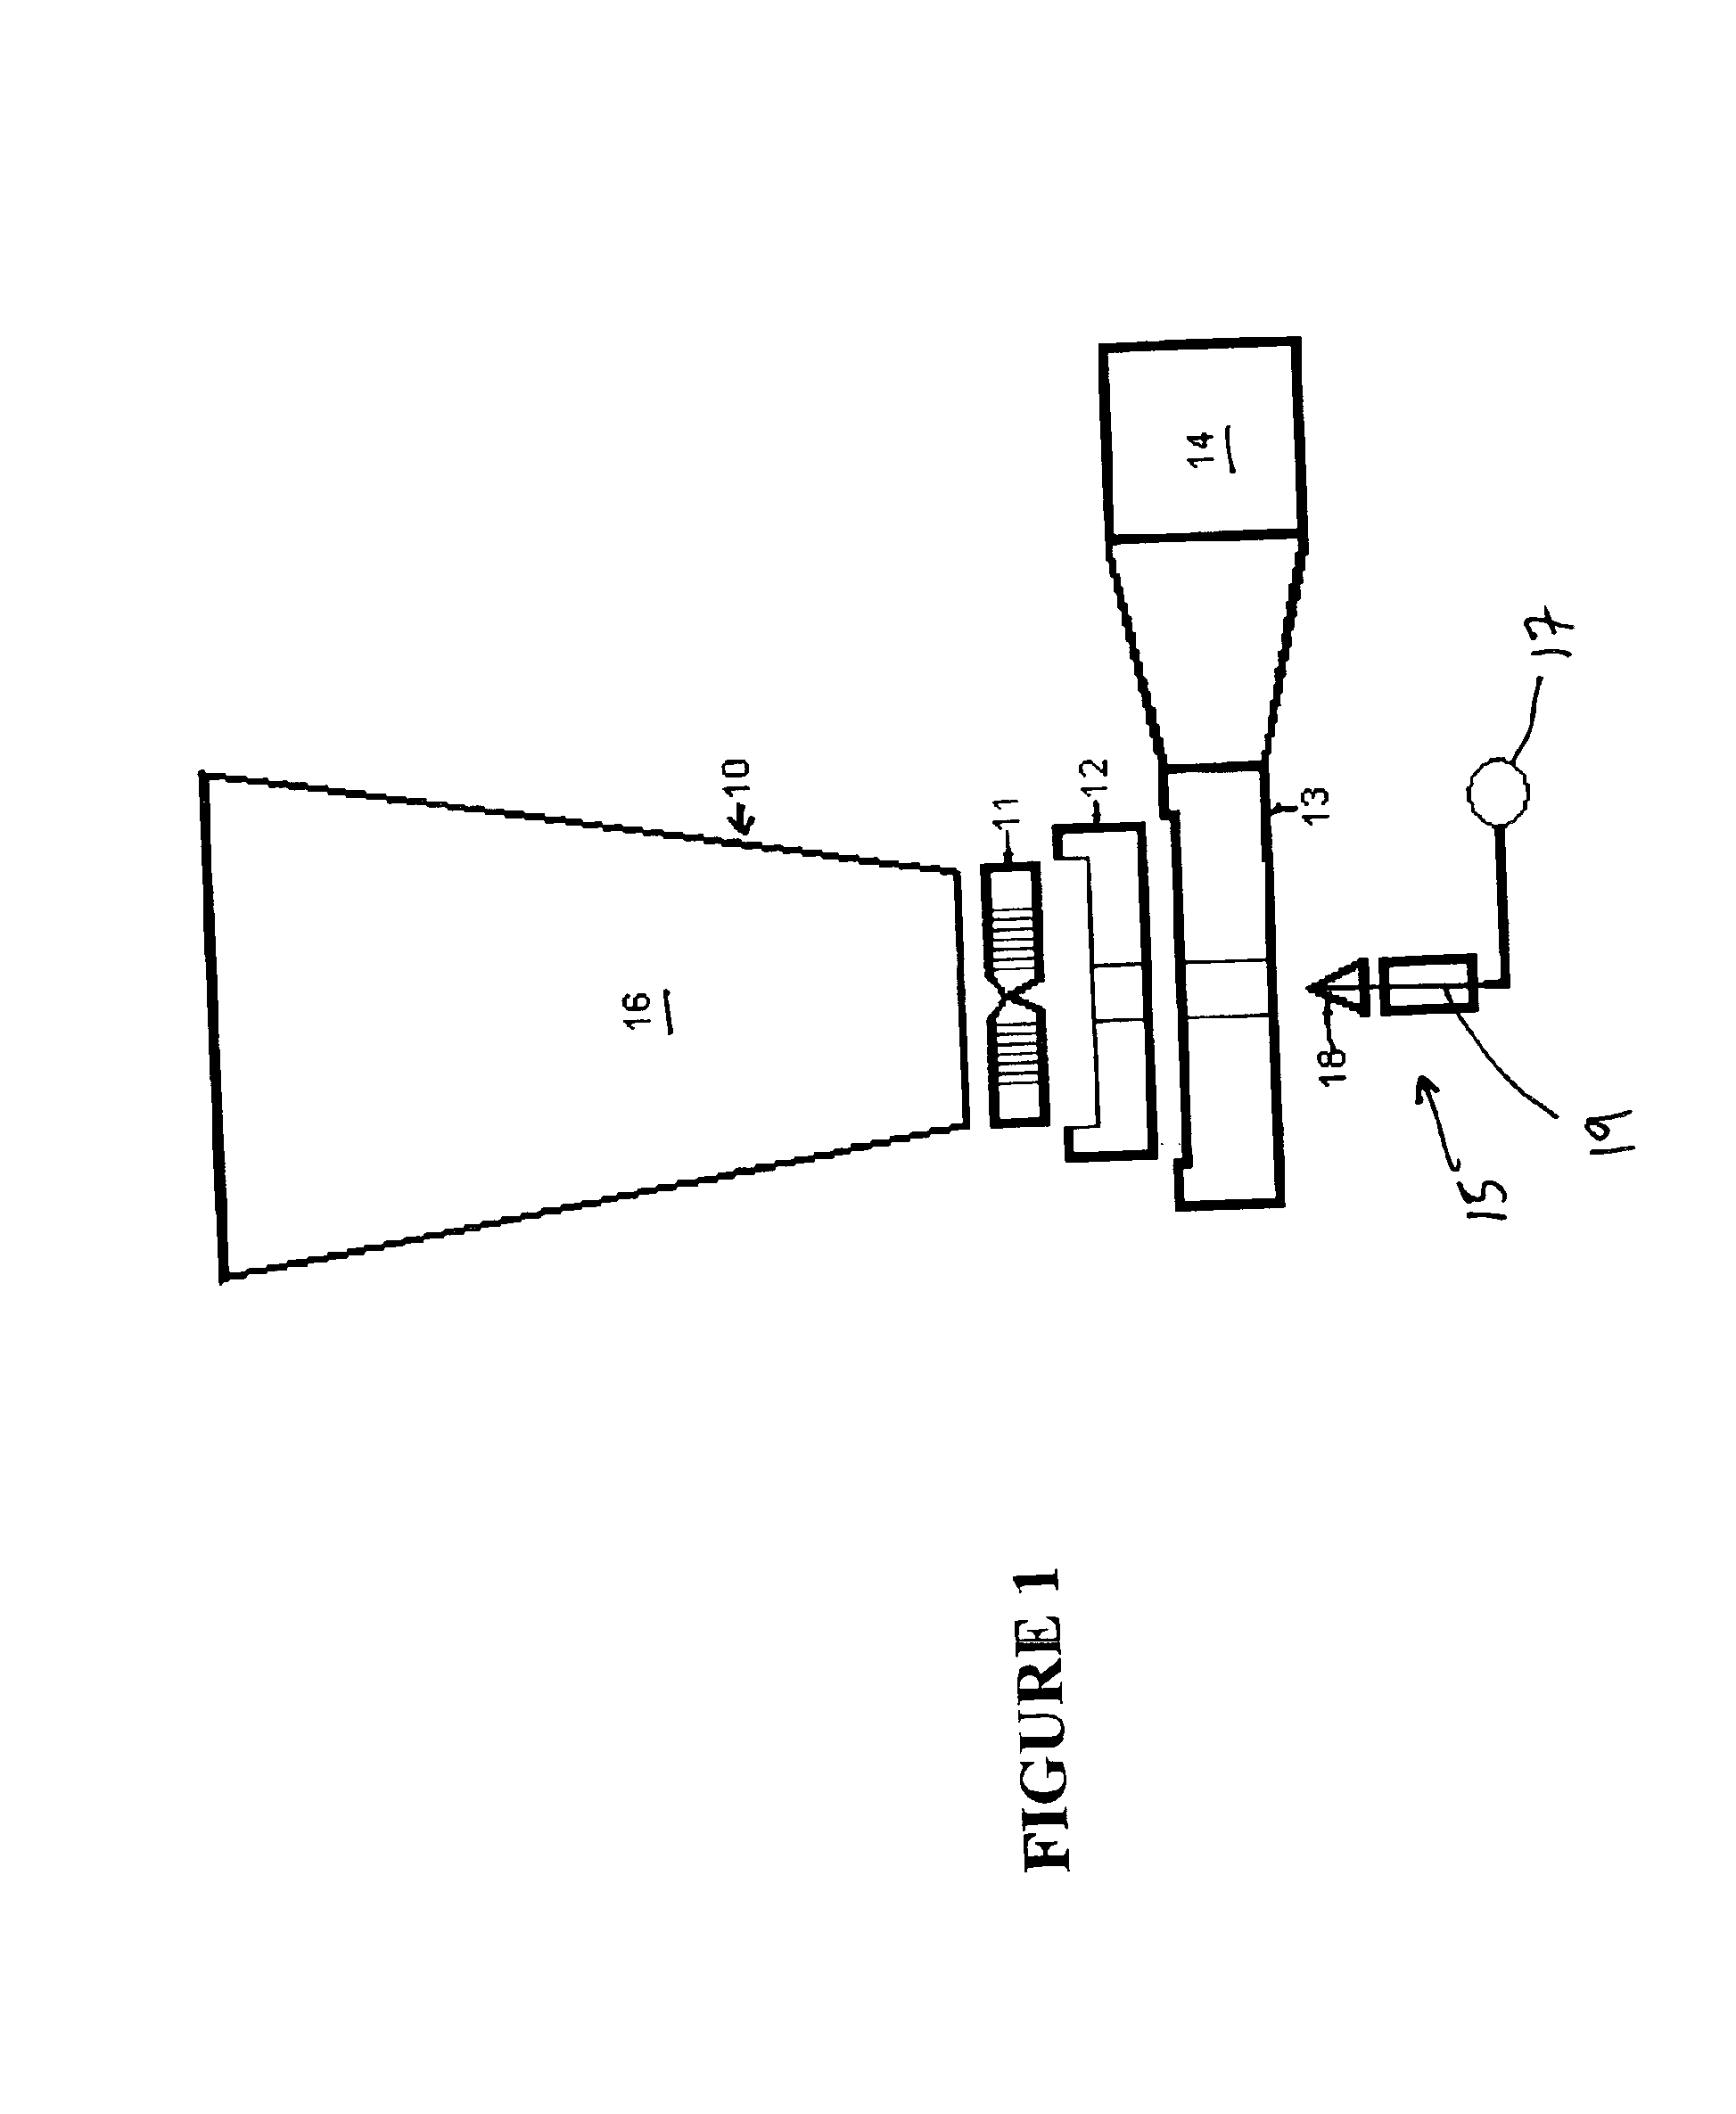 Method for using an ultrasonic nozzle to coat a medical appliance